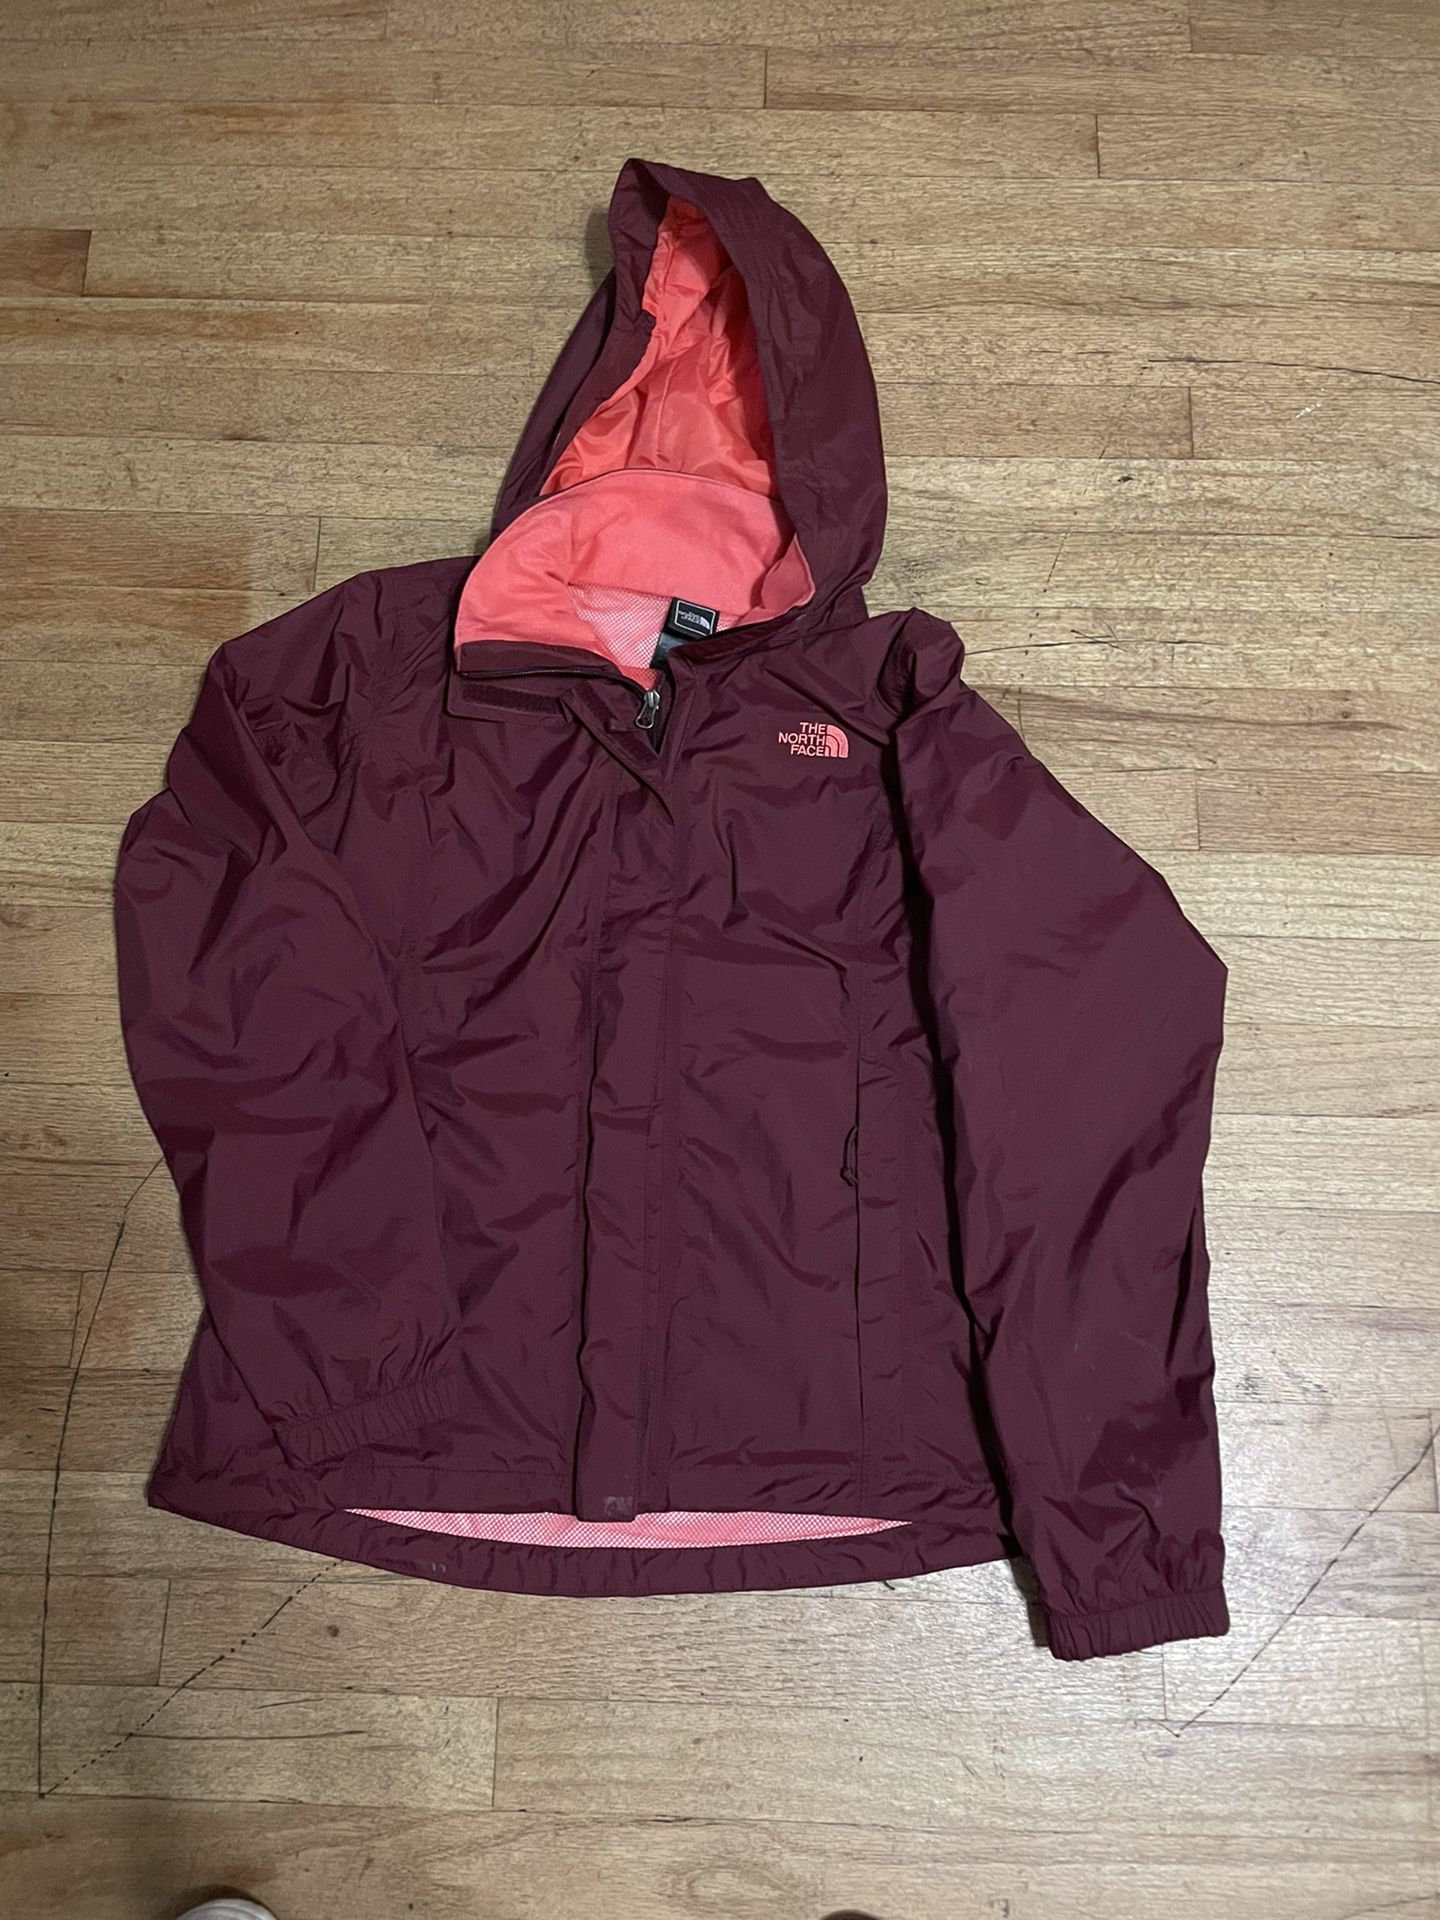 The North Face wind Breaker Jacket For Women’s 